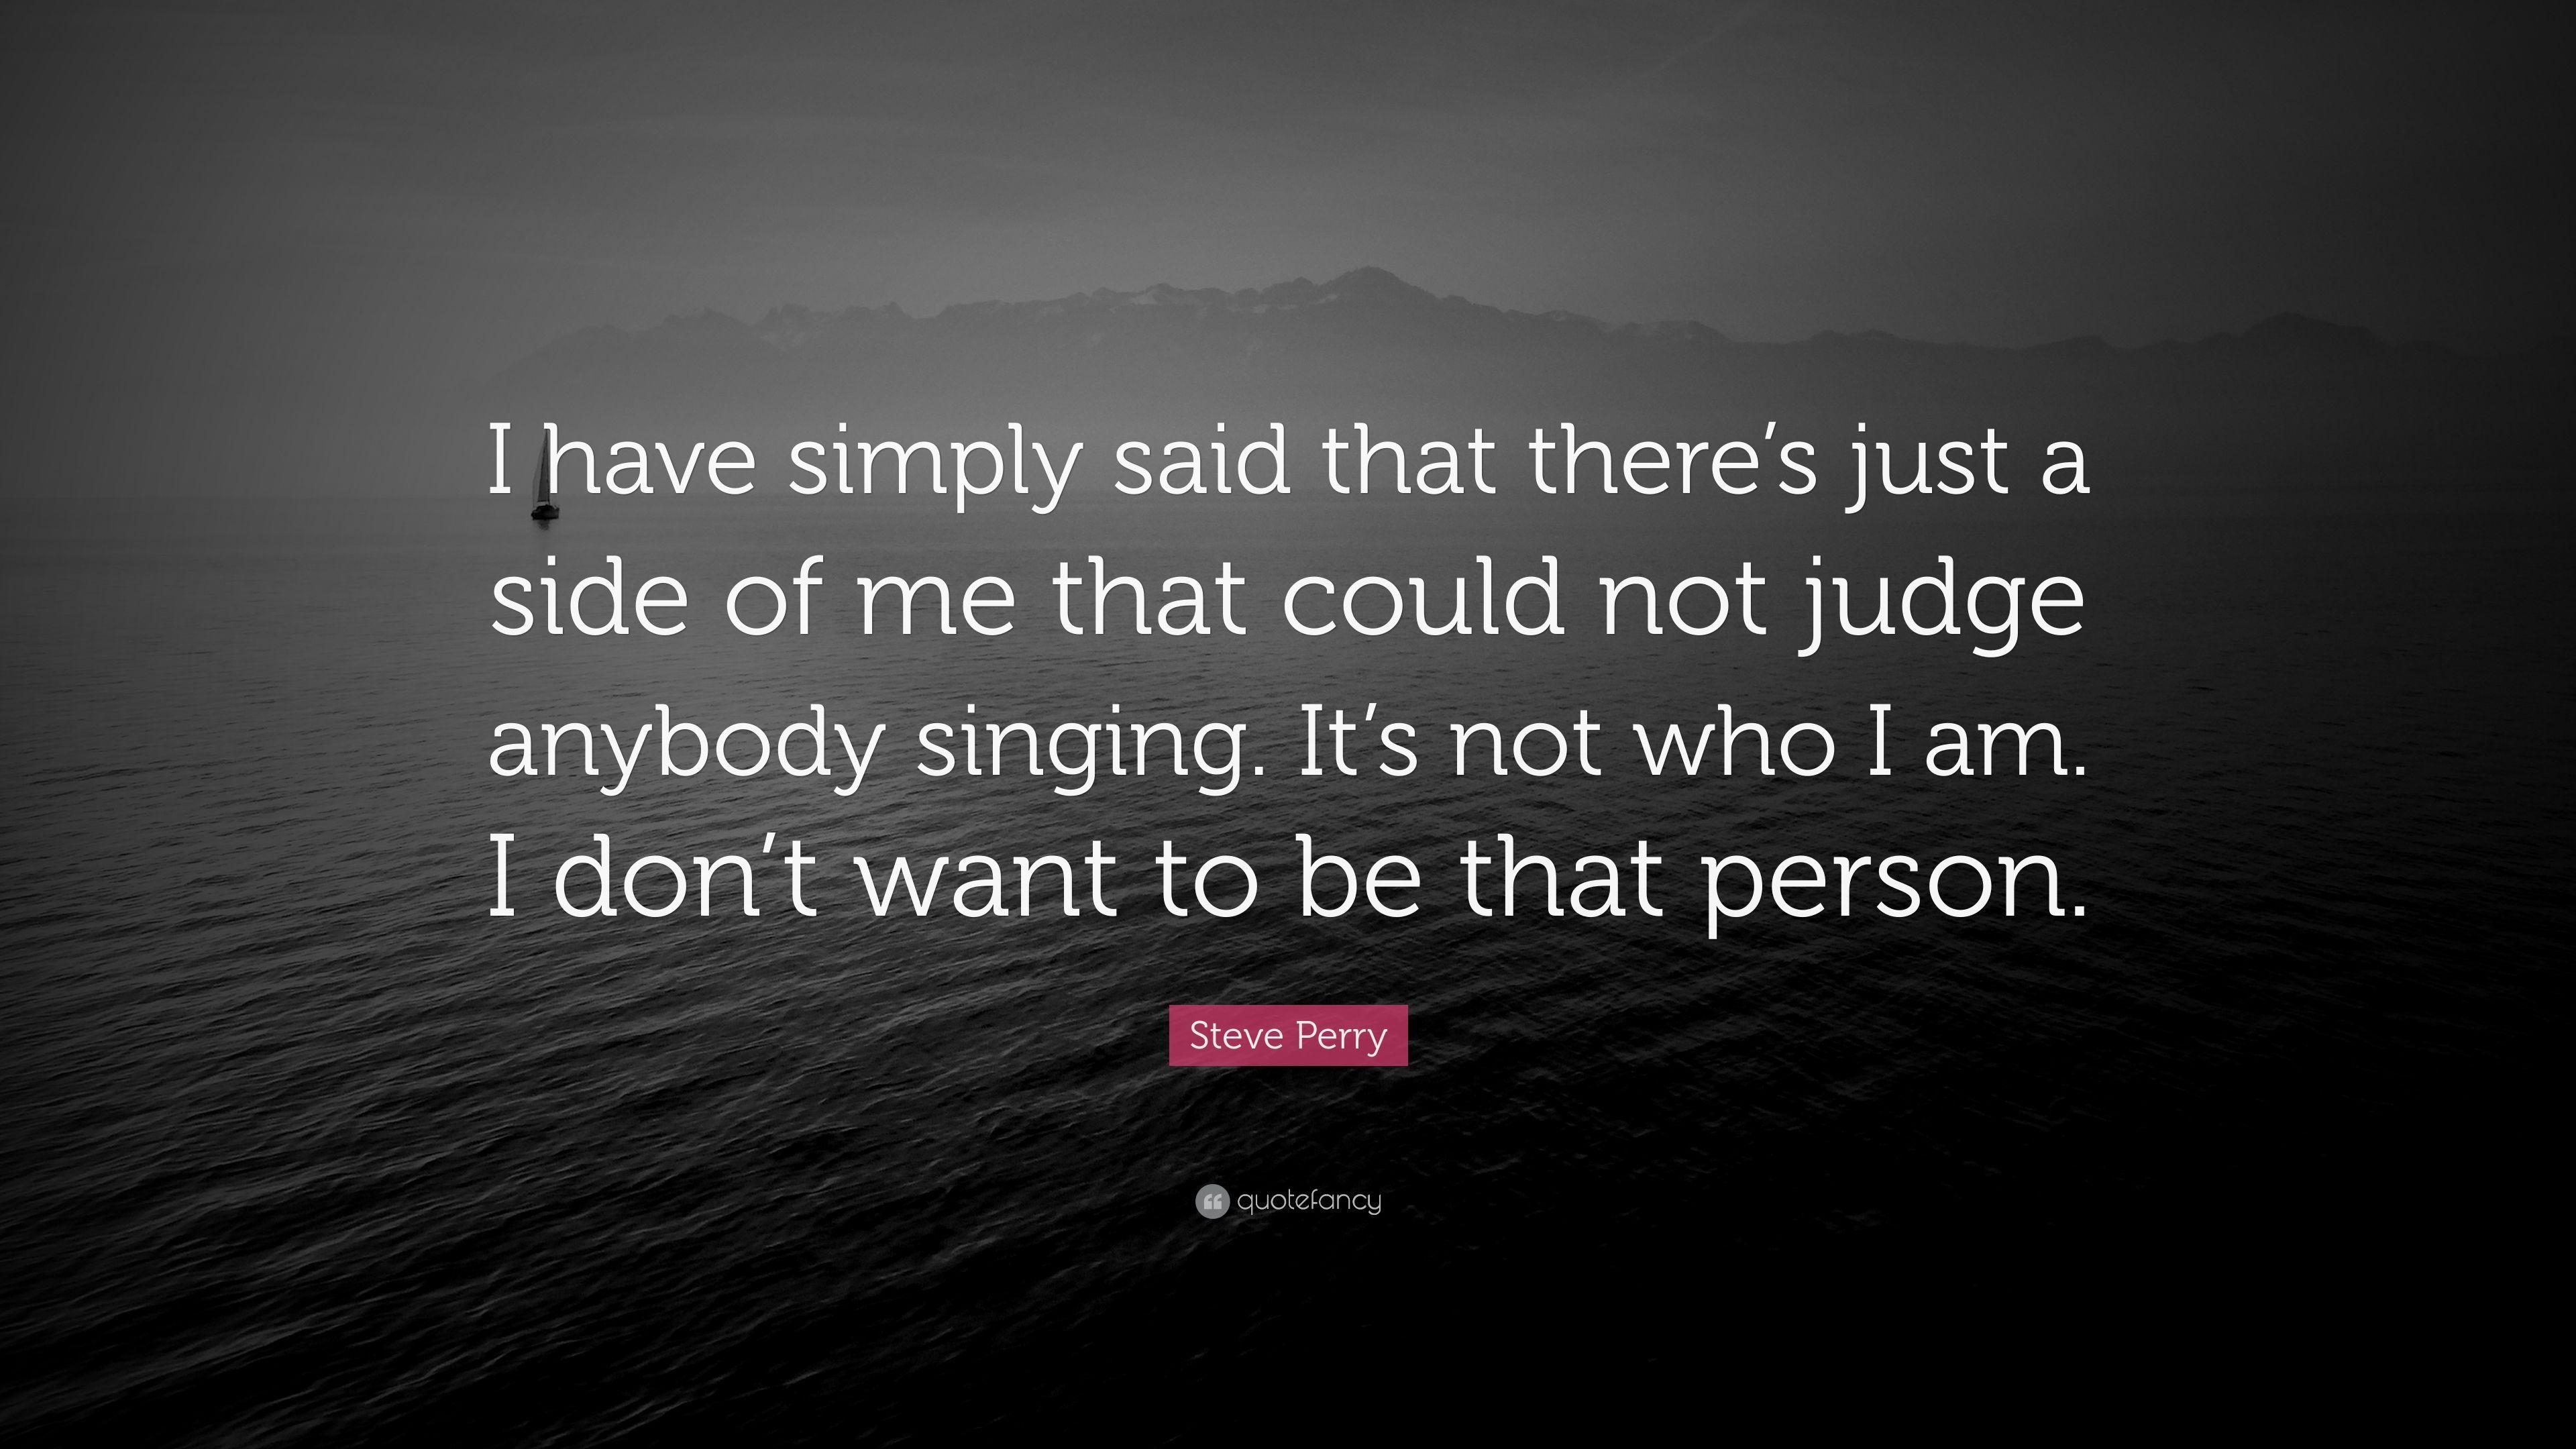 Steve Perry Quote: “I have simply said that there's just a side